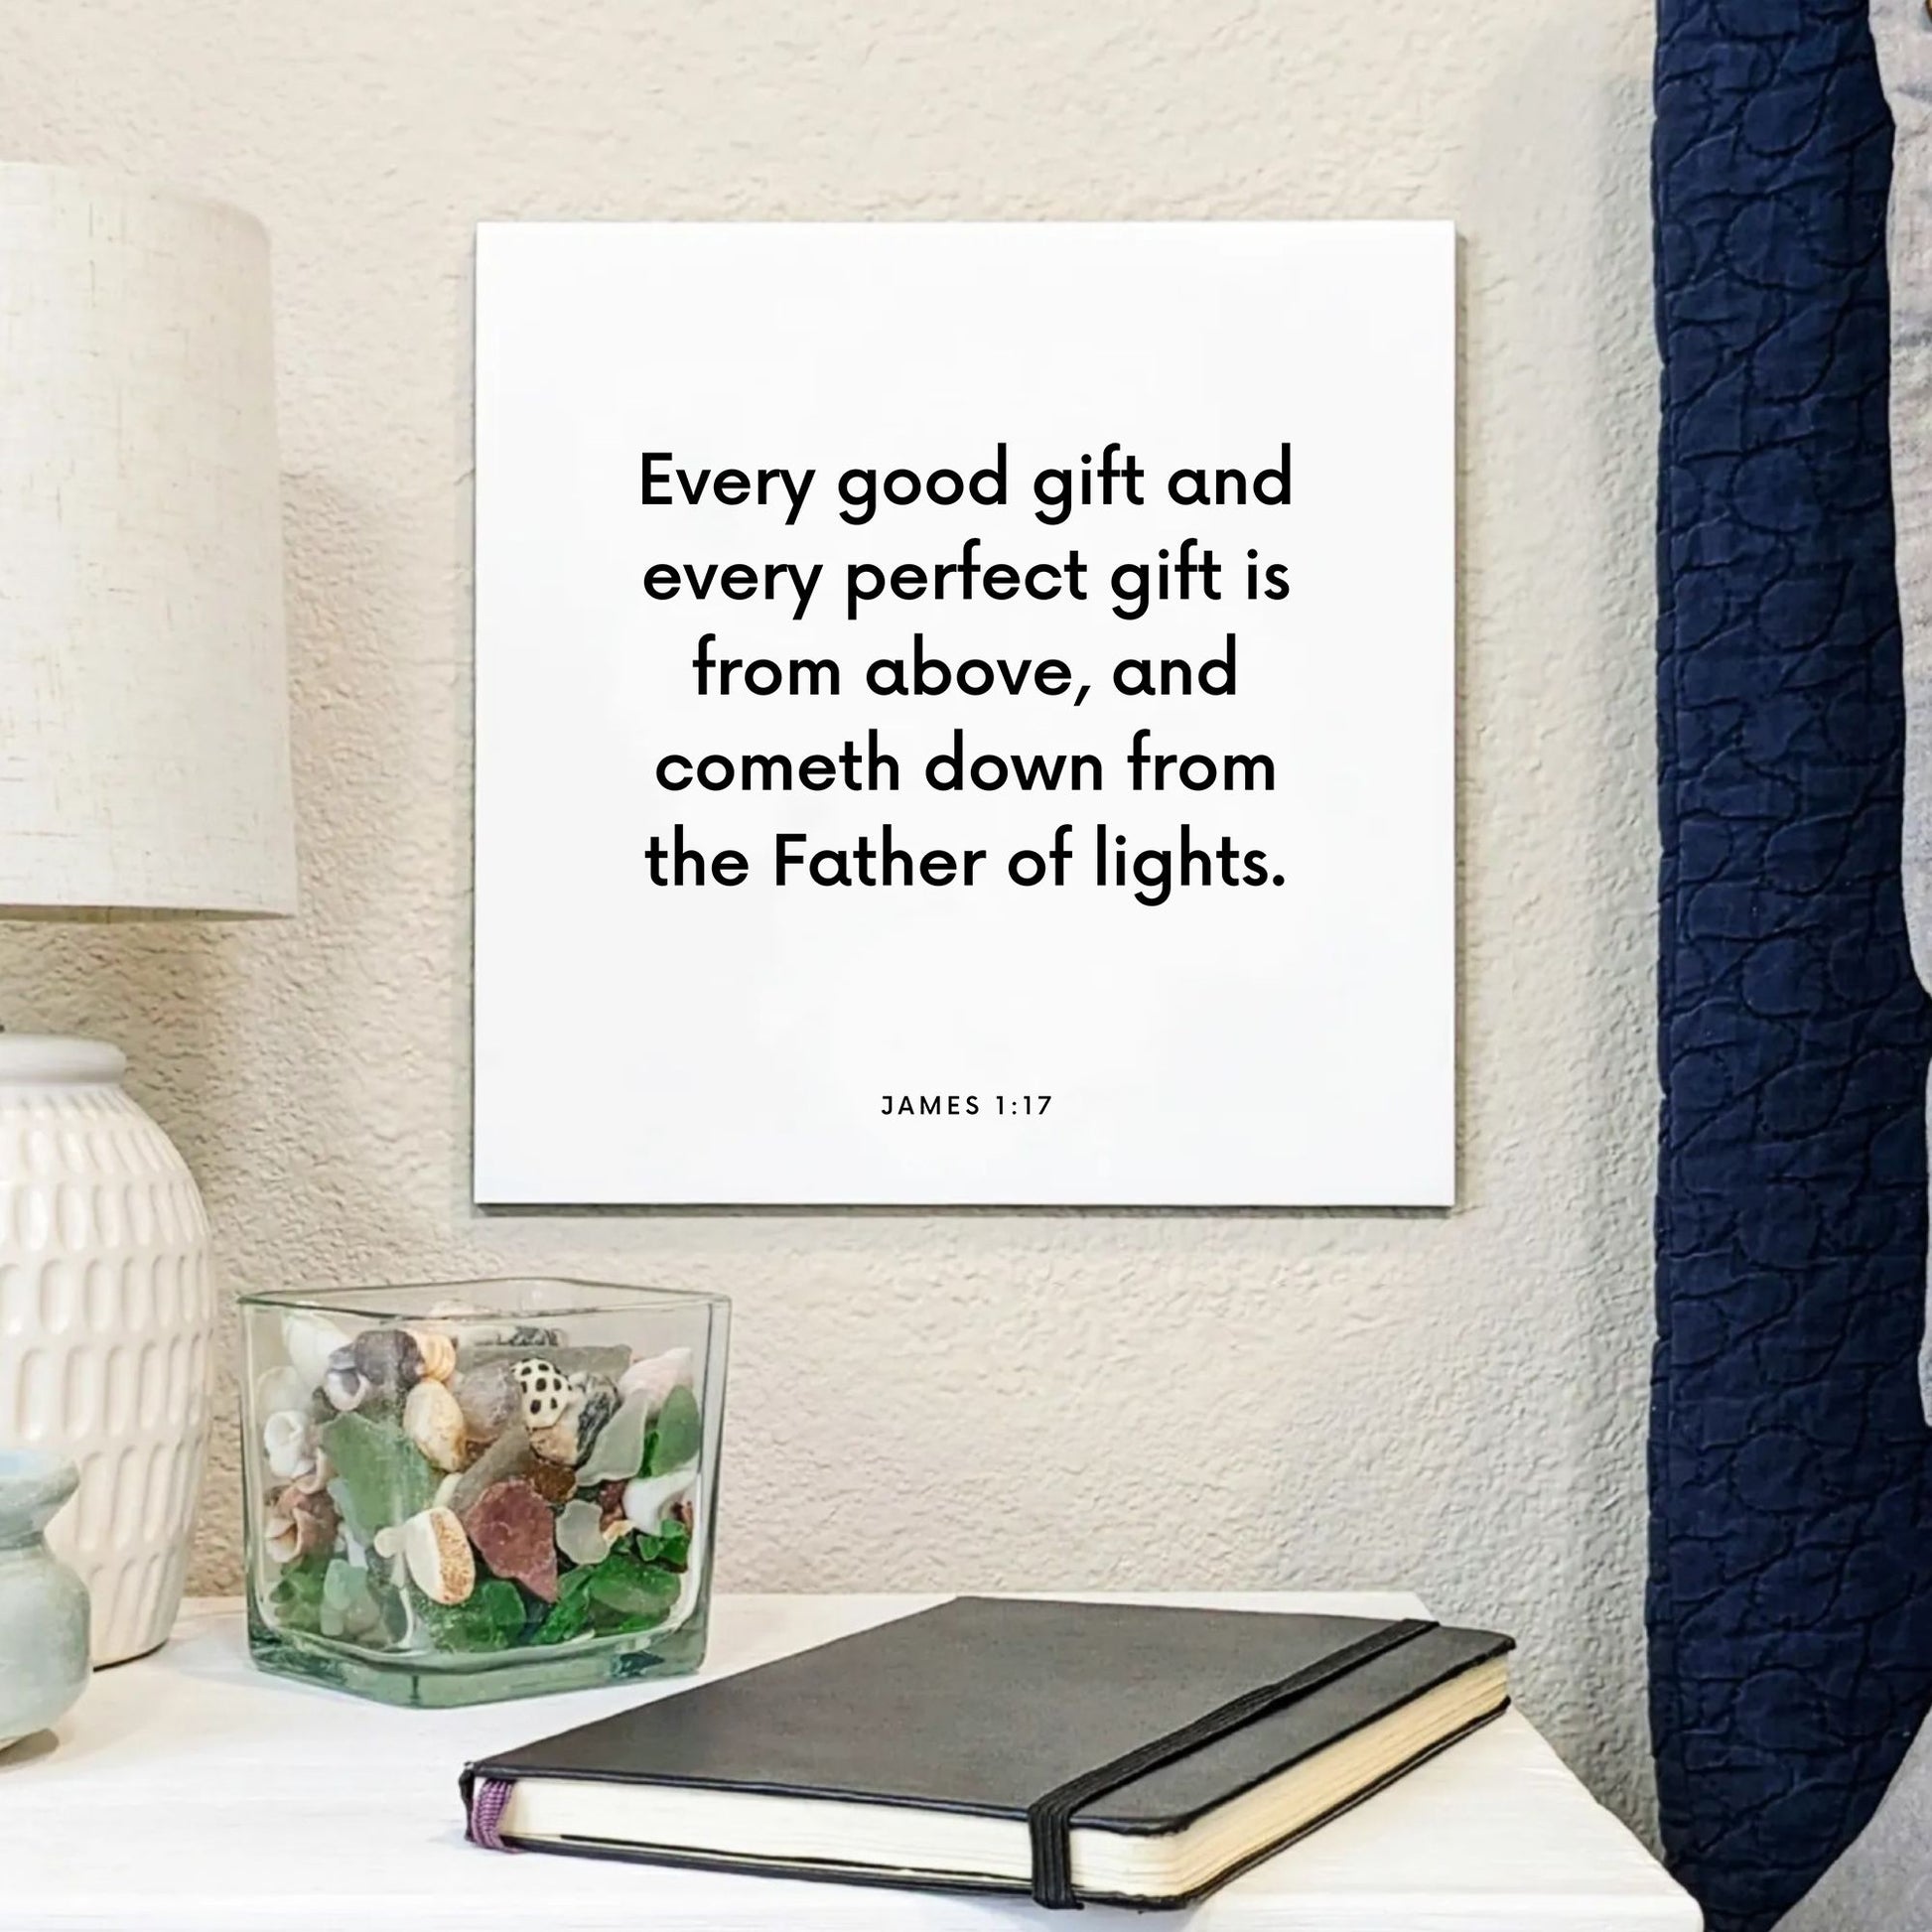 Bedside mouting of the scripture tile for James 1:17 - "Every good gift and every perfect gift is from above"